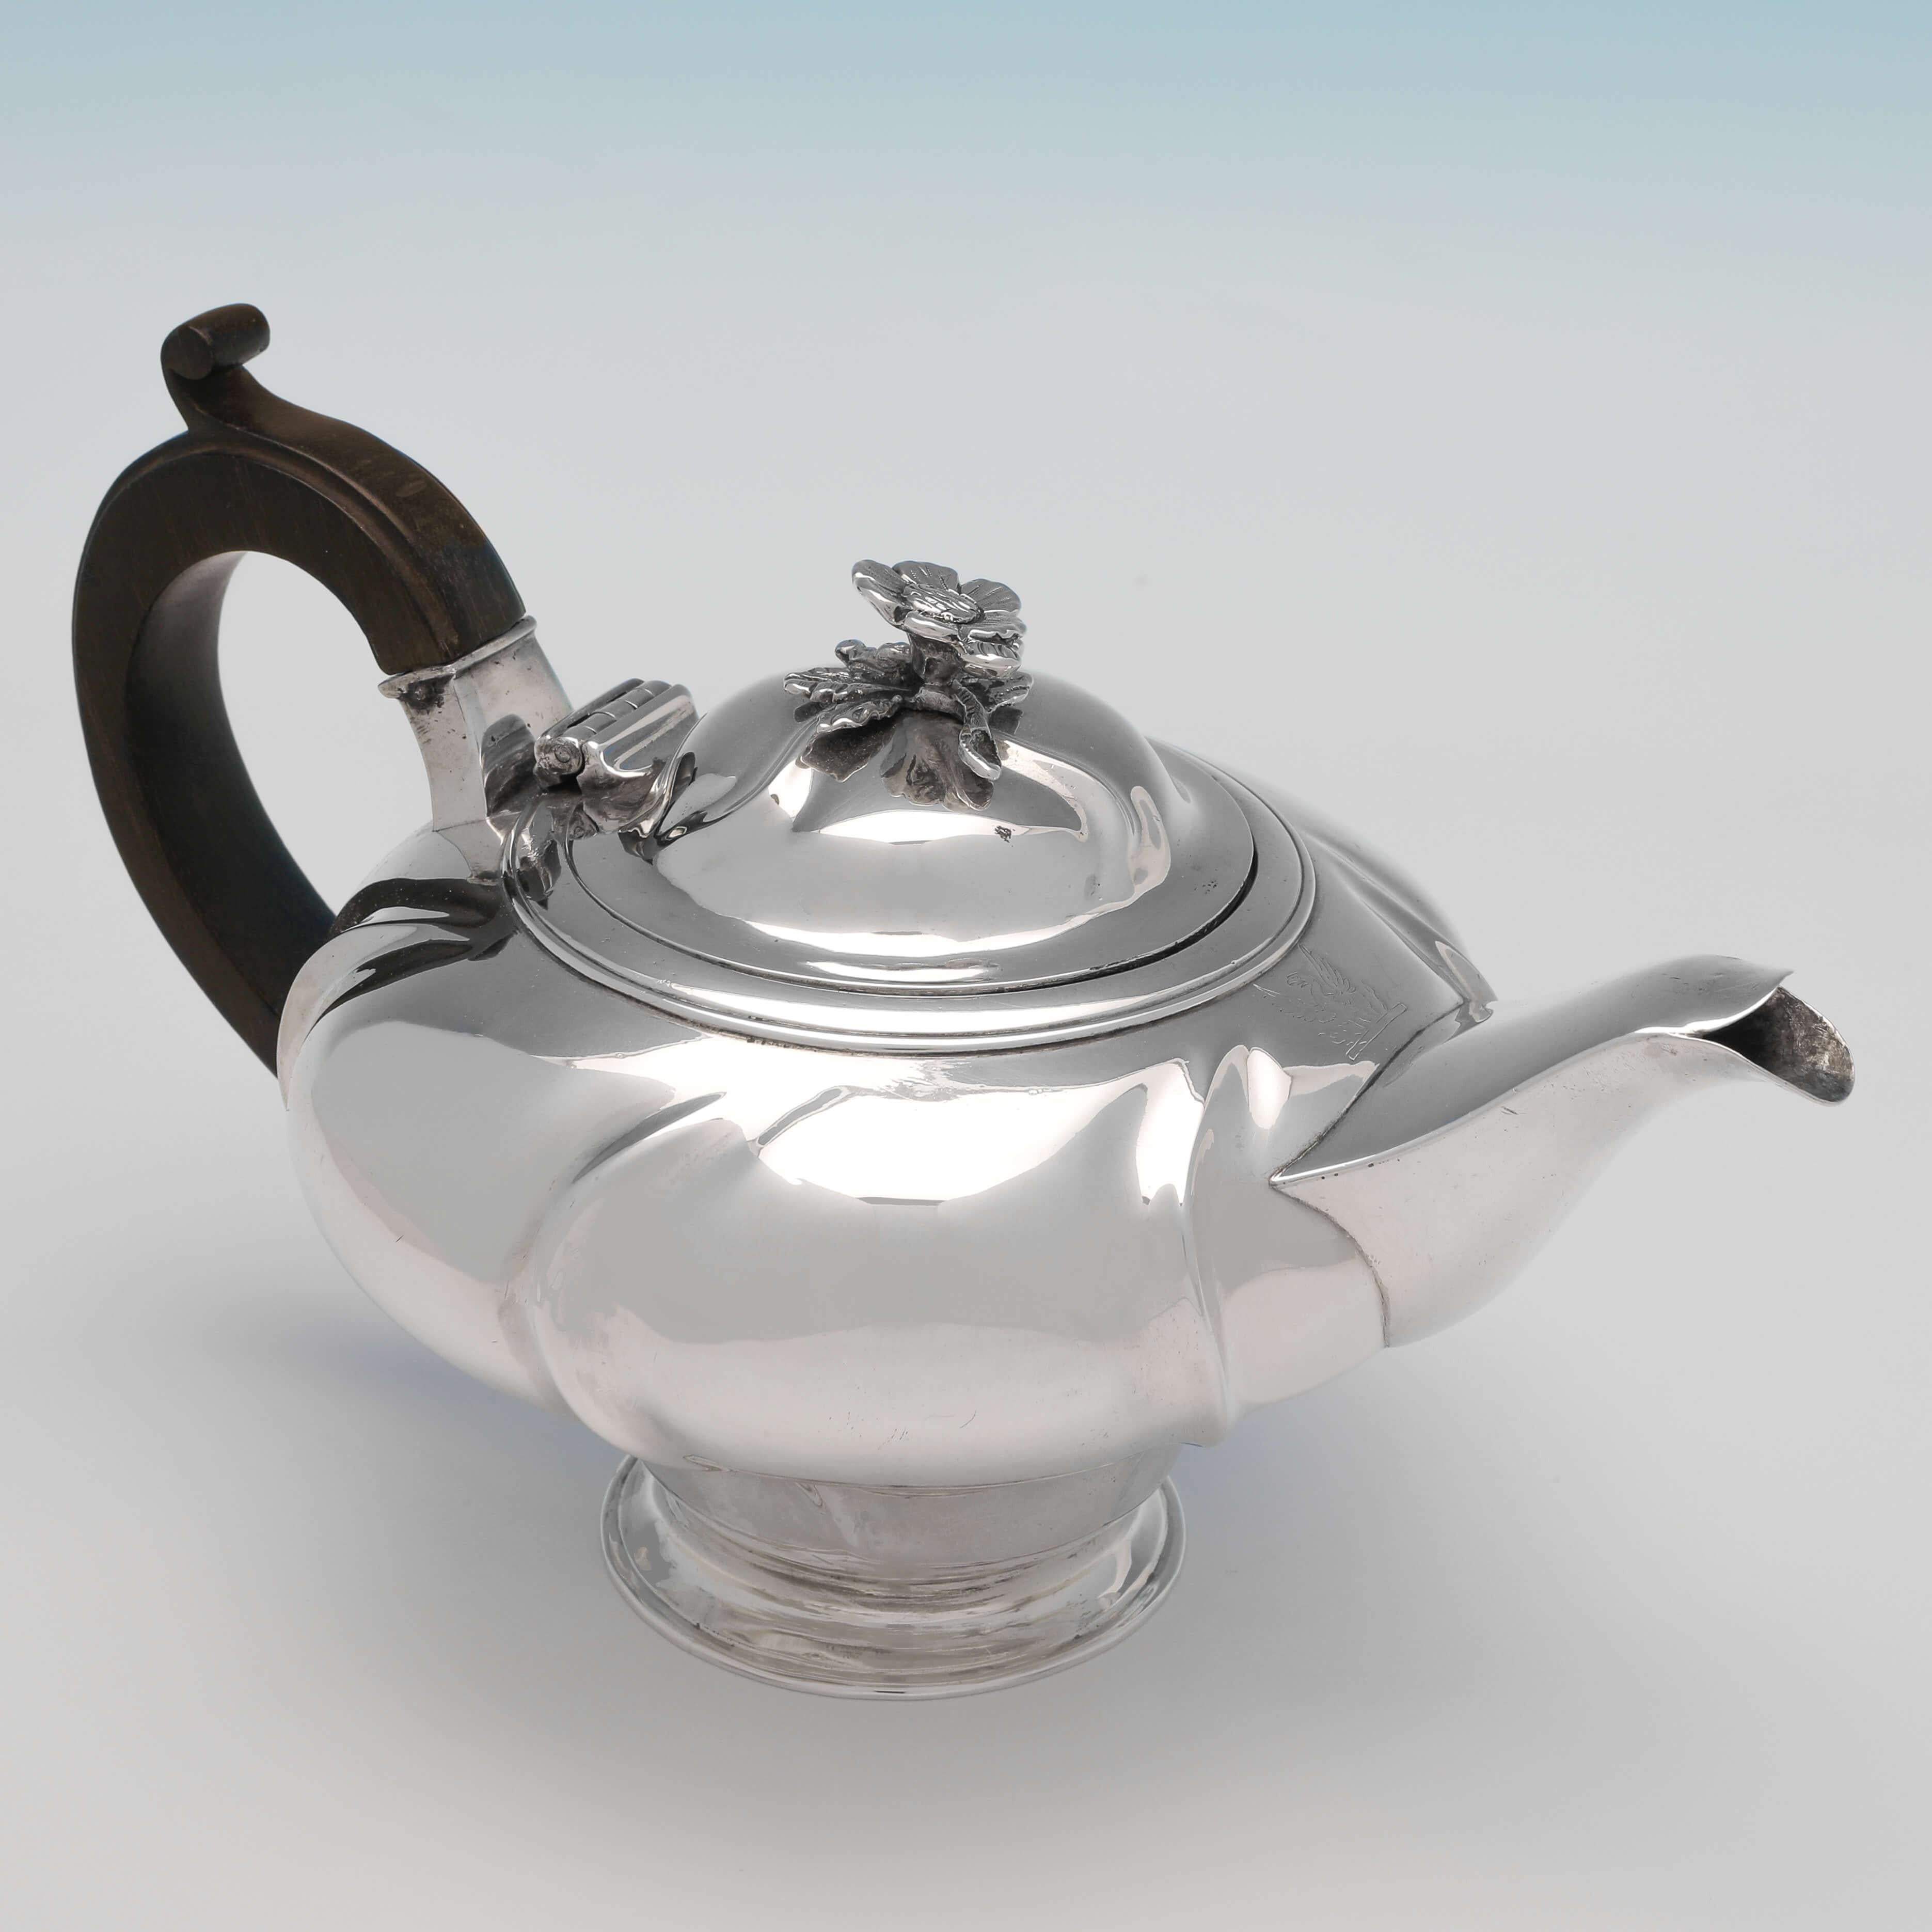 Hallmarked in London in 1824 by John Wakefield, this delightful, George IV, antique sterling silver Batchelor Teapot, is round in shape, and has an engraved crest and a wooden handle. The teapot measures 5